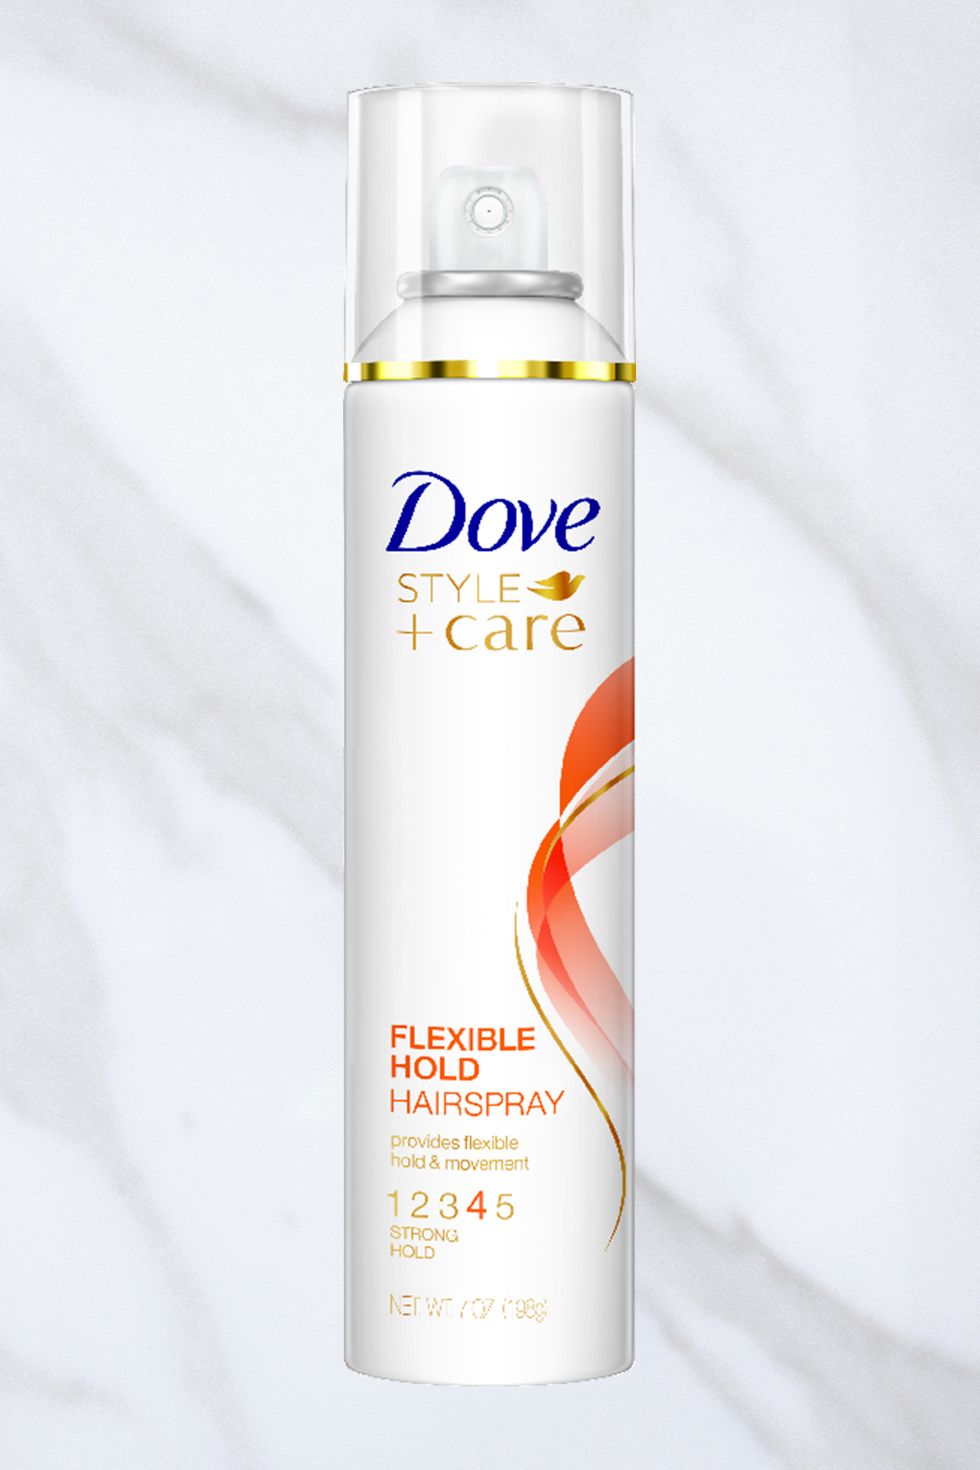 <p>"Date night hair needs to feel effortless, so don't stray too far from your natural texture," says Mark Townsend, celebrity stylist for Dove. Whether your go-to style is waves, tousled texture, or even a half-bun, finish your look with a not-too-stiff styling spray like <a href="http://www.dove.us/Products/Hair/Style-Care/Strength-Shine-Flexible-Hold-Hairspray.aspx?shop=1" target="_blank">Dove Style+Care Strength & Shine Flexible Hold Hairspray</a>, $5. </p>